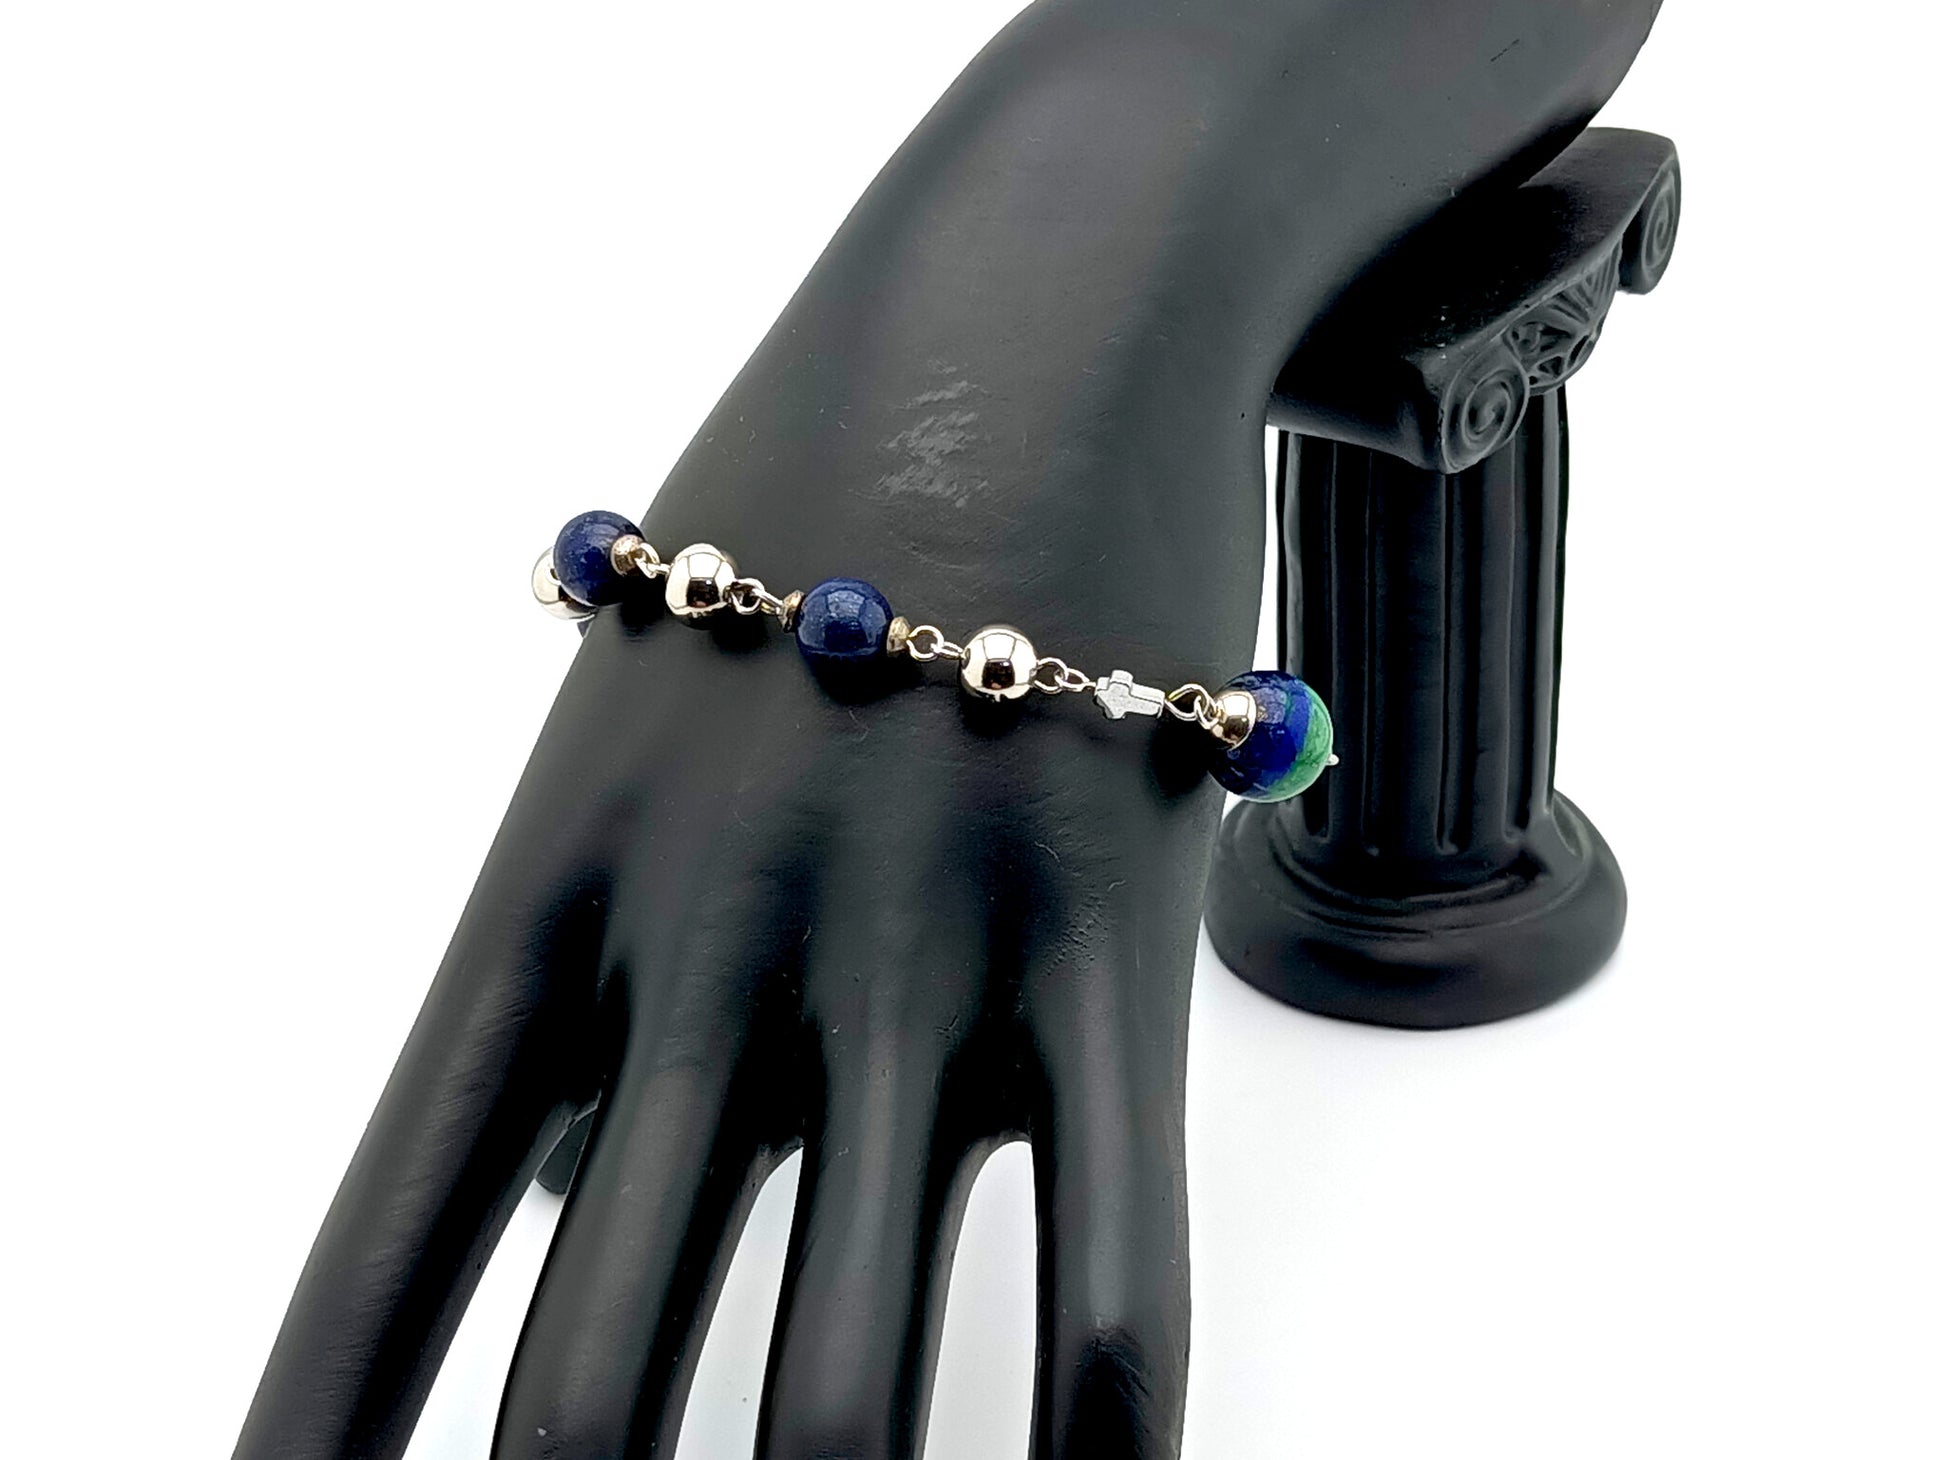 Stainless steel unique rosary beads single decade rosary bracelet with Lapis Lazuli beads, stainless steel lobster clasp and hematite cross.